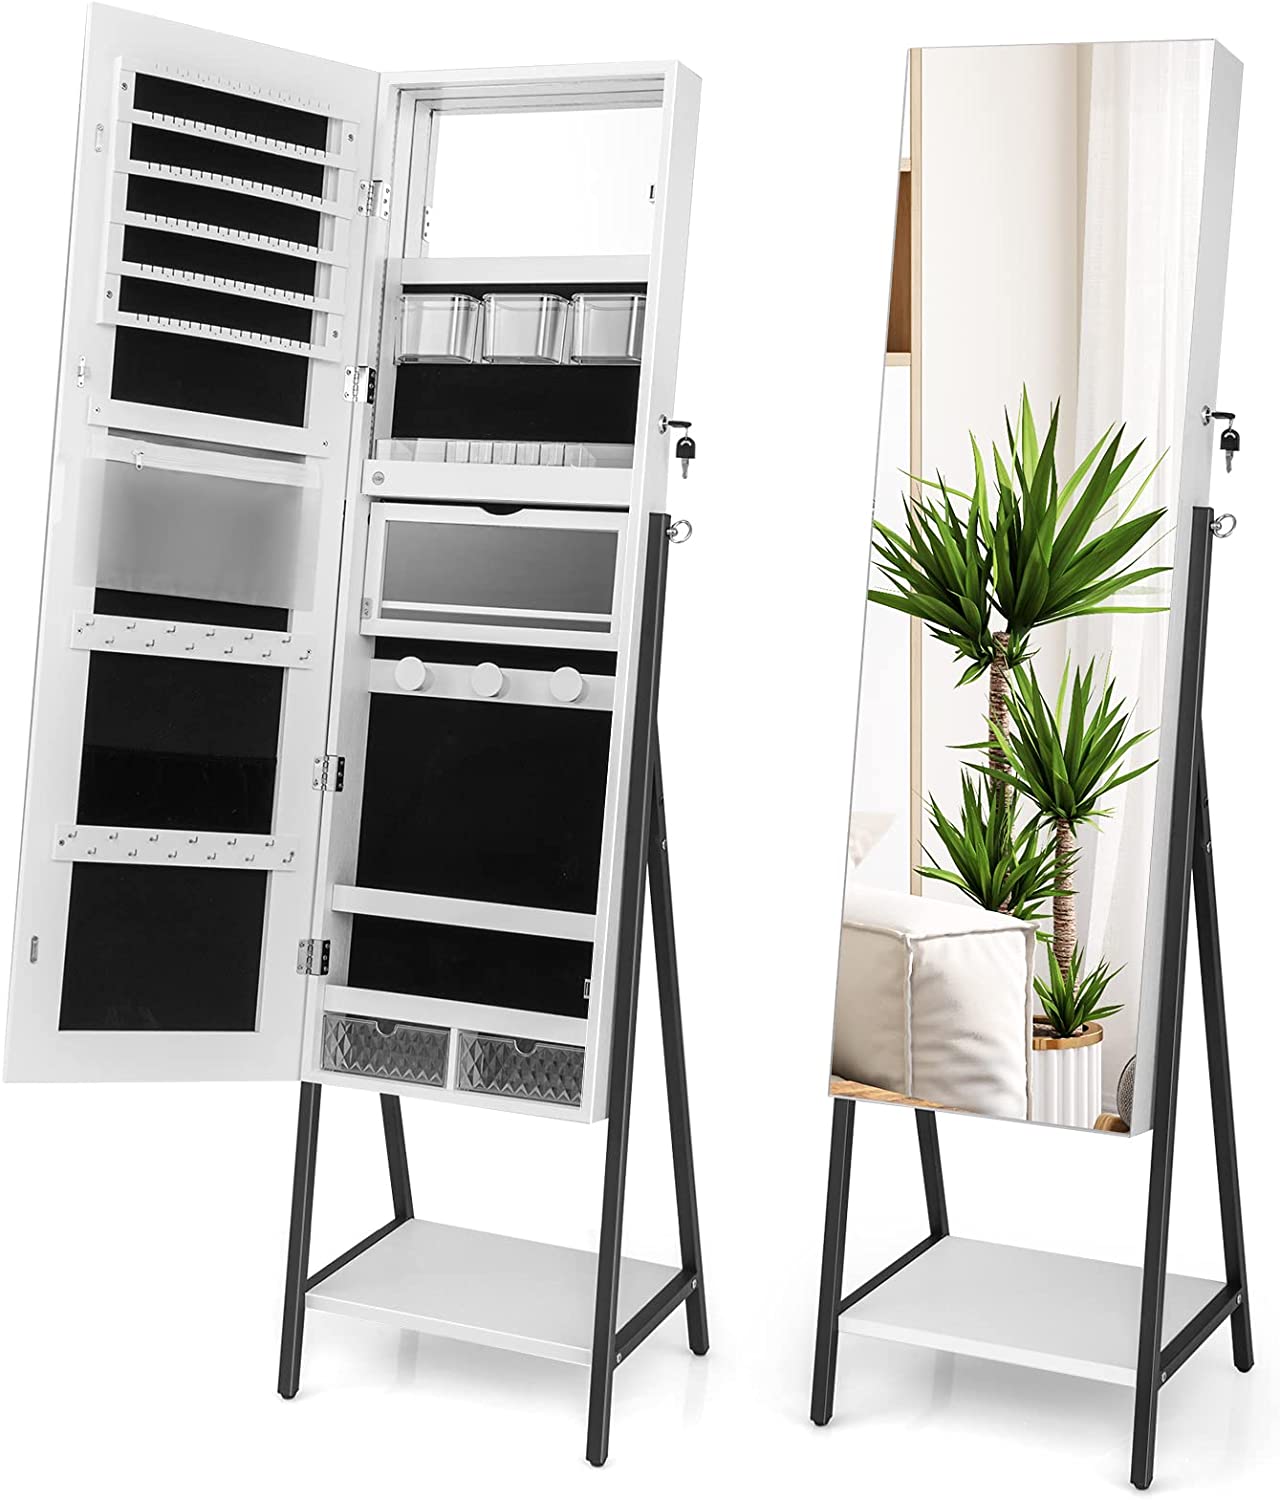 CHARMAID LED Strip Jewelry Armoire with 47.2"H Full Length Mirror, Lockable Jewelry Cabinet Organizer